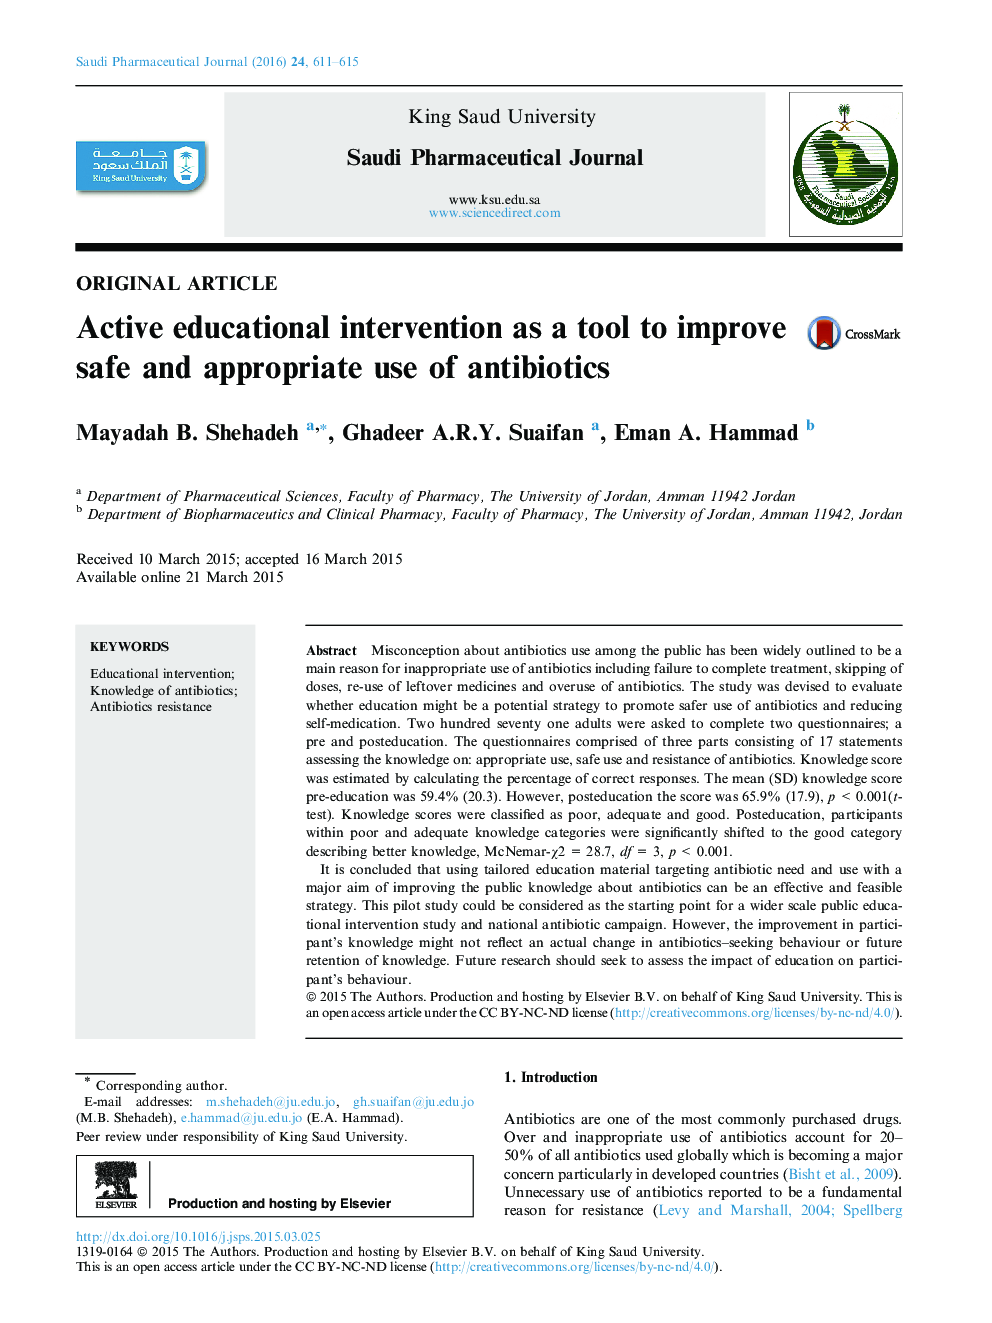 Active educational intervention as a tool to improve safe and appropriate use of antibiotics